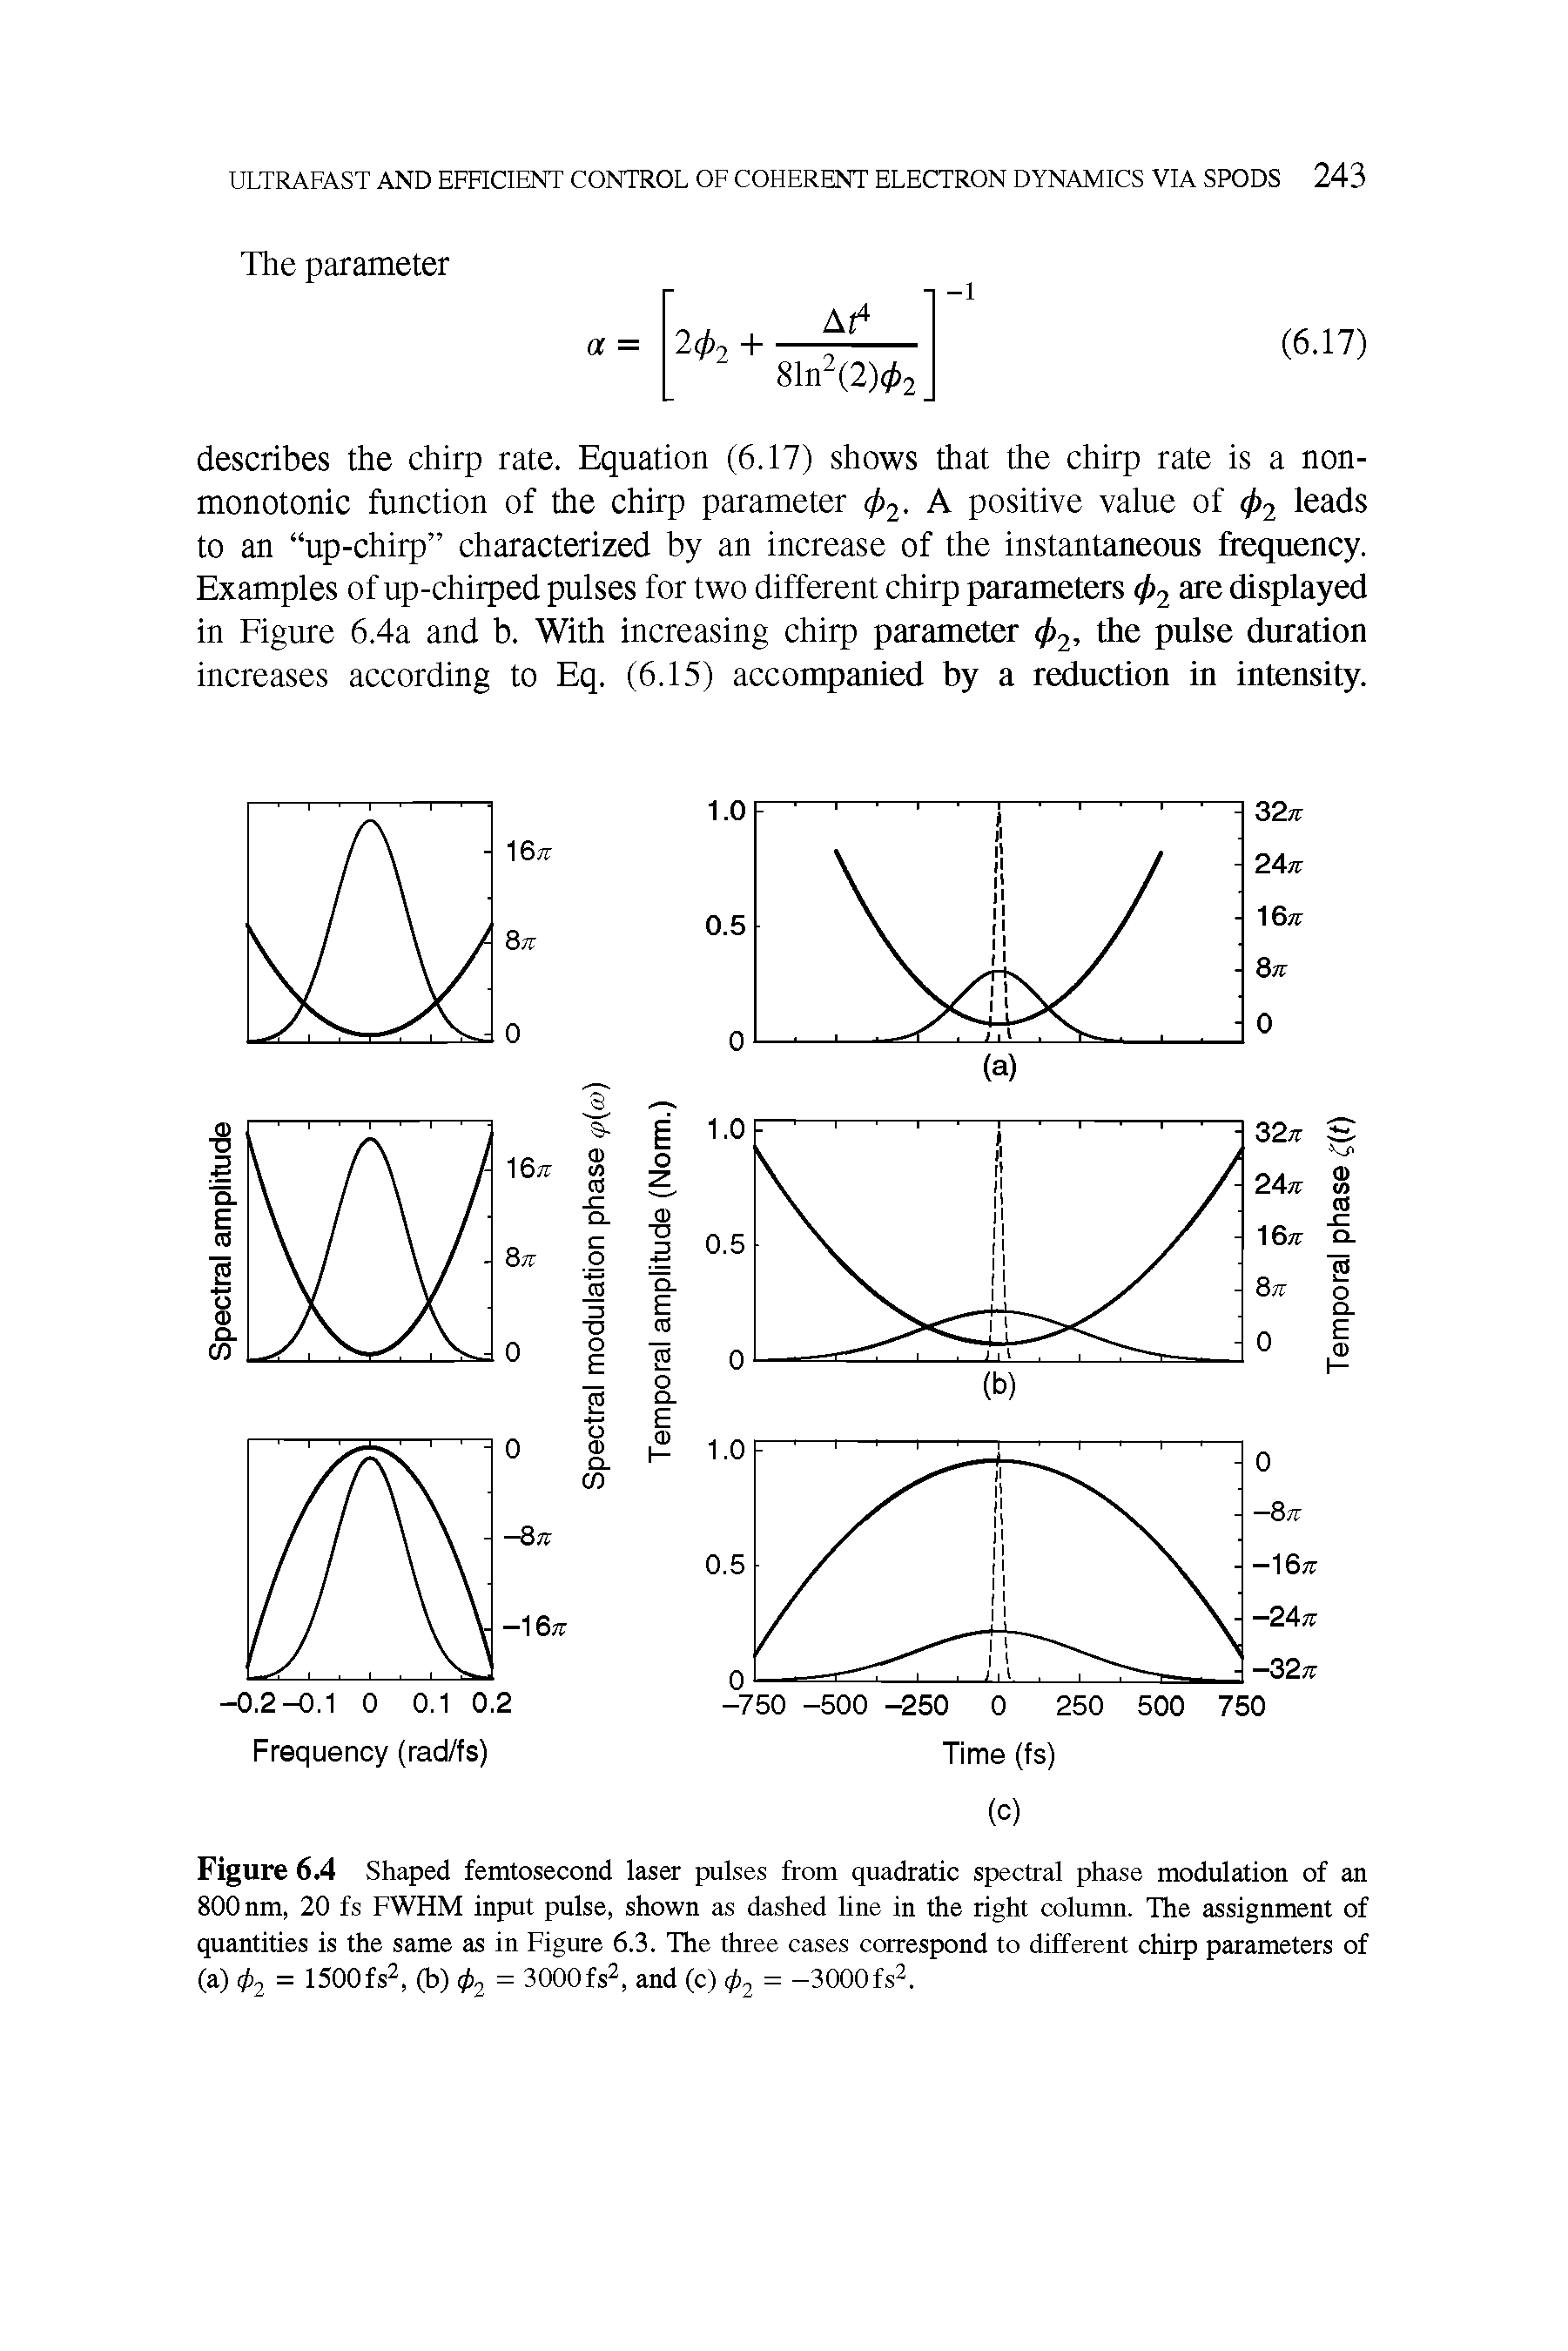 Figure 6.4 Shaped femtosecond laser pulses from quadratic spectral phase modulation of an 800 nm, 20 fs FWHM input pulse, shown as dashed line in the right column. The assignment of quantities is the same as in Figure 6.3. The three cases correspond to different chirp parameters of (a) 4>2 = ISOOfs, (b) ( 2 = 3000fs, and (c) = -3000fs. ...